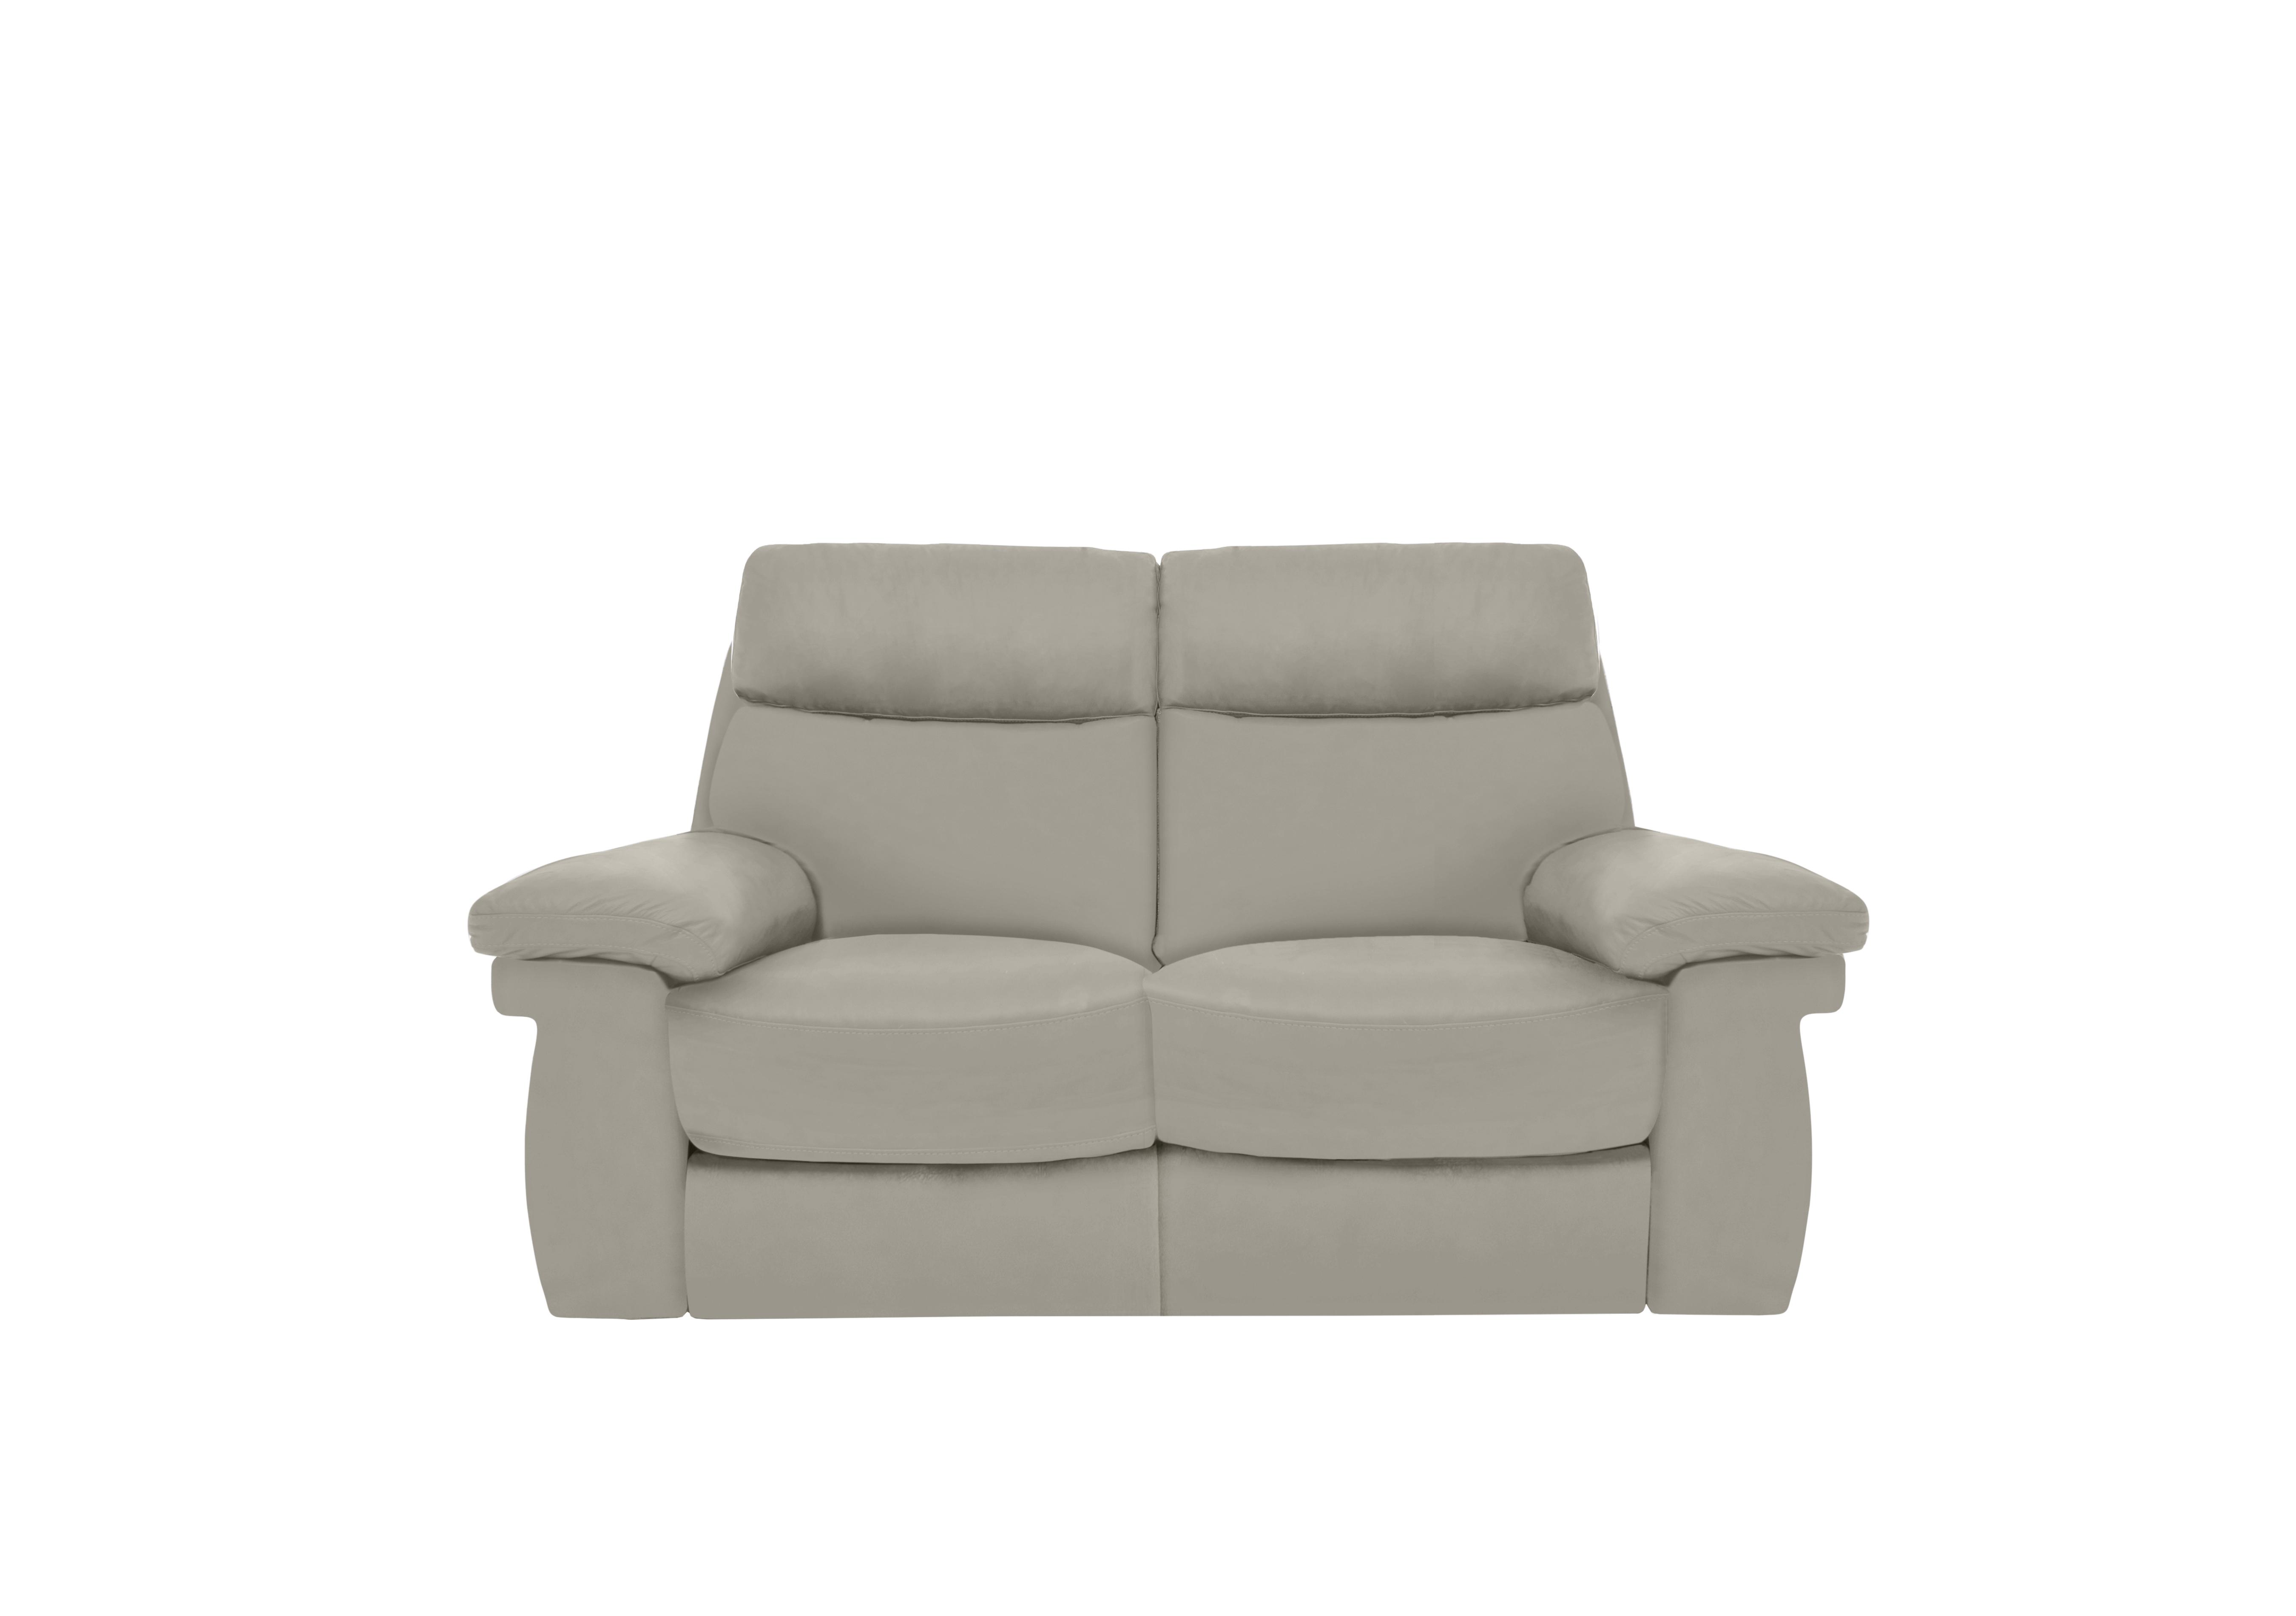 Serene 2 Seater Leather Power Recliner Sofa with Power Headrests and Power Lumbar in Bx-251e Grey on Furniture Village